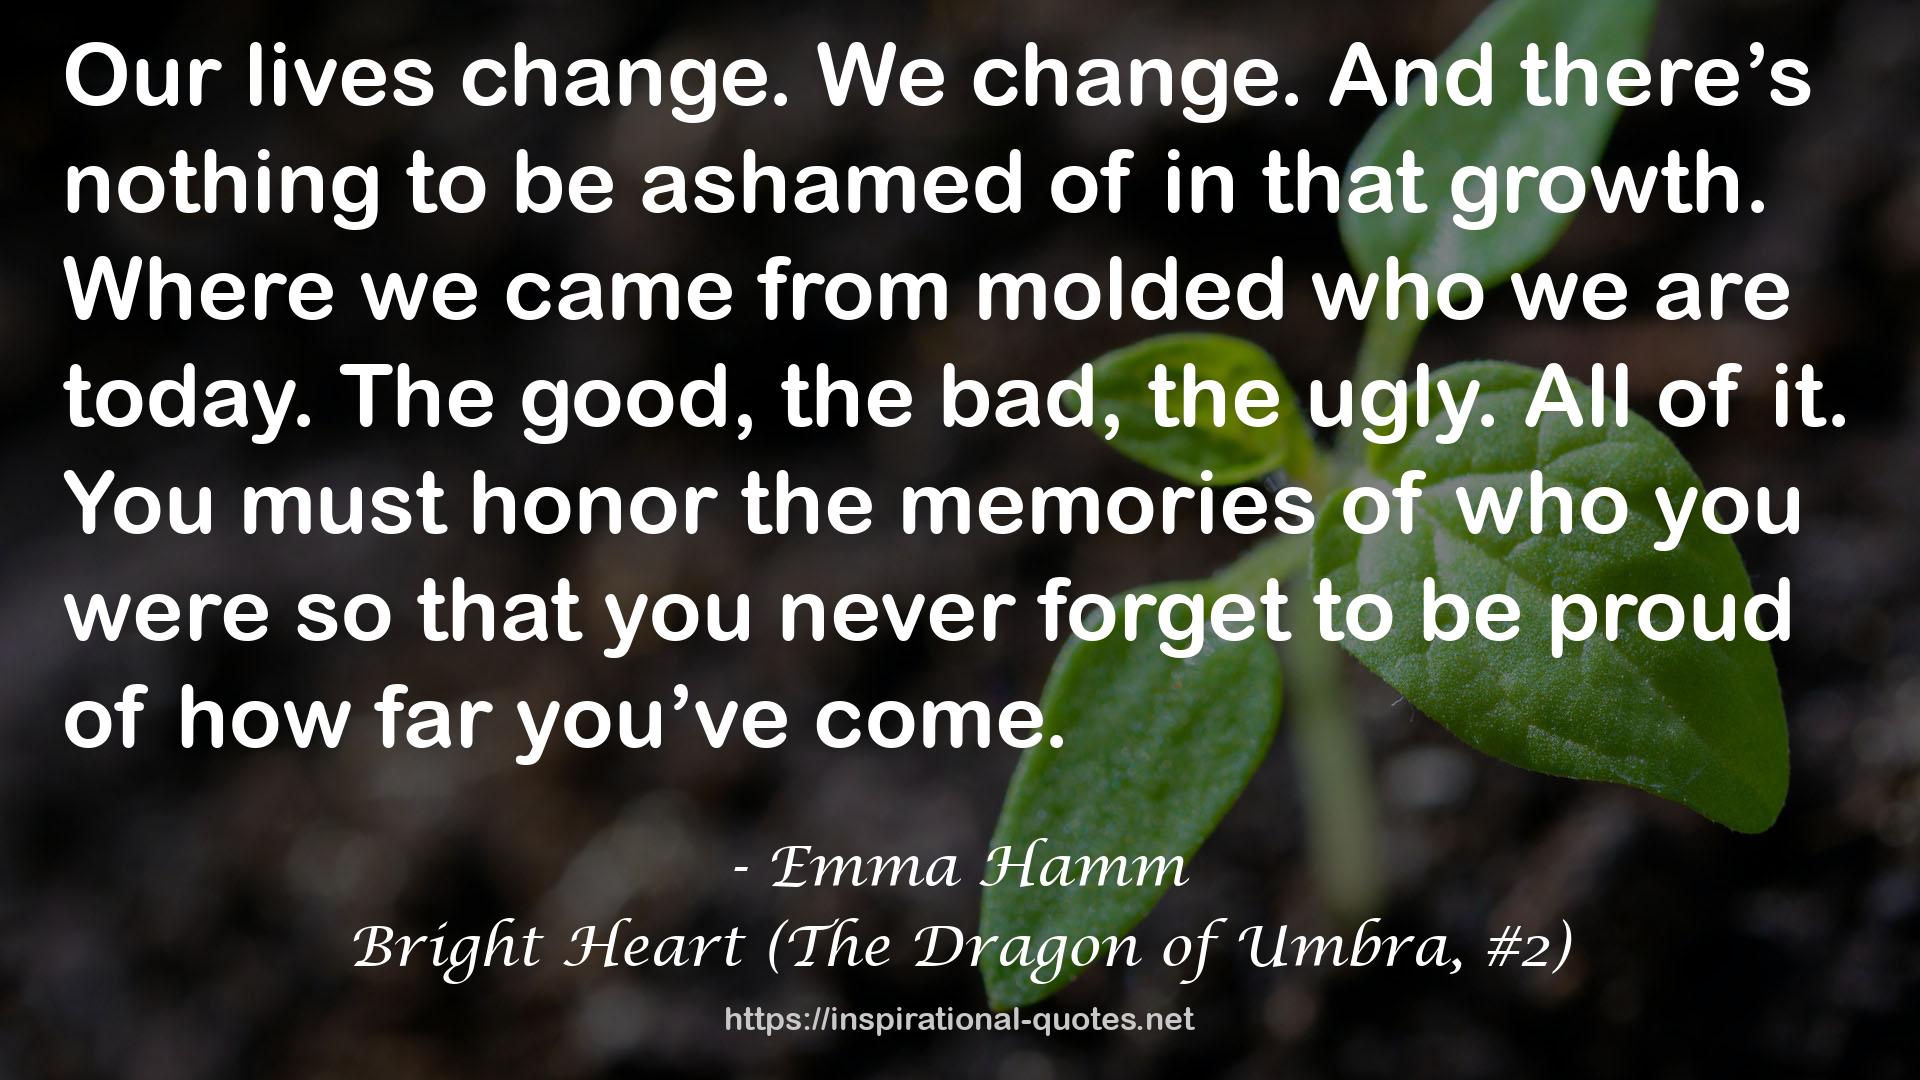 Bright Heart (The Dragon of Umbra, #2) QUOTES